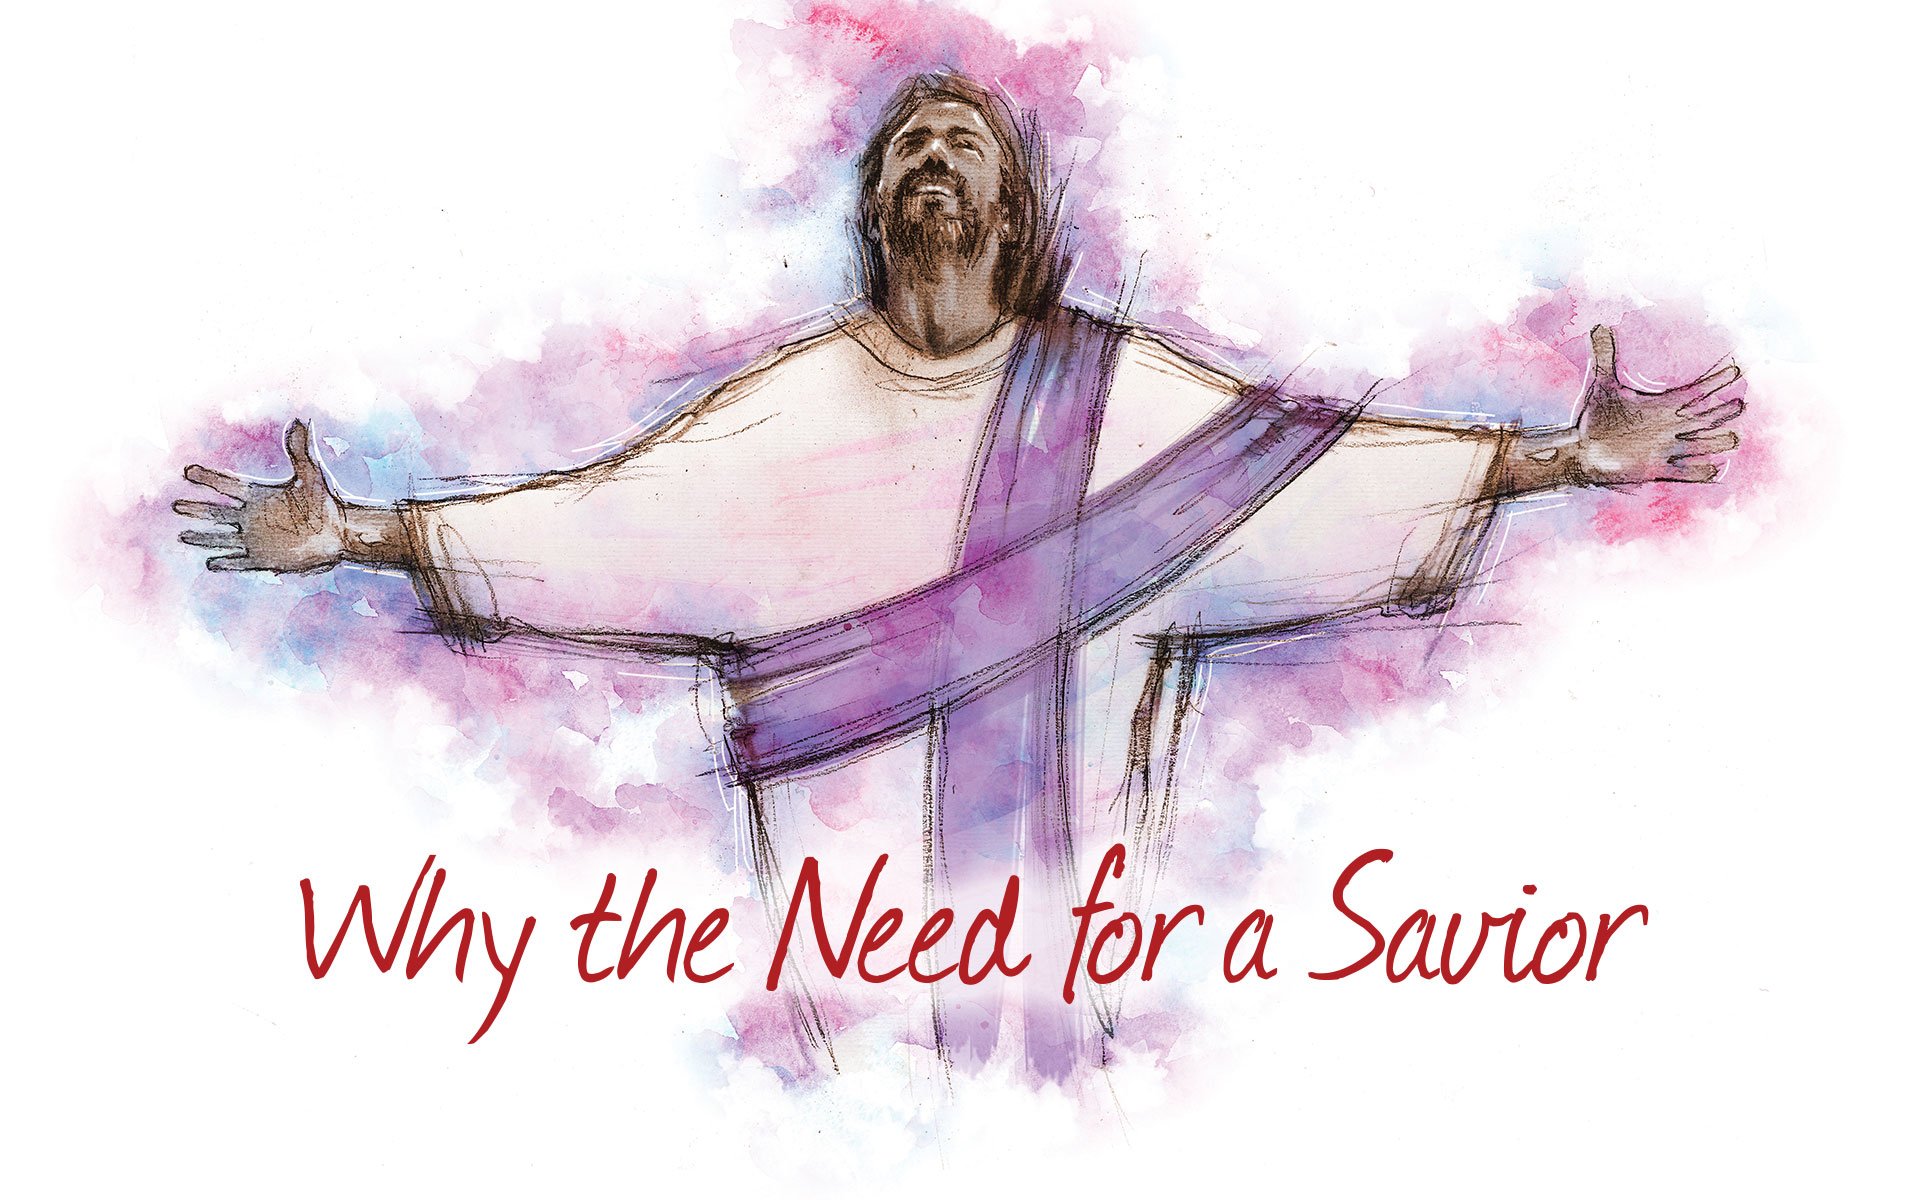 Why the Need for a Savior